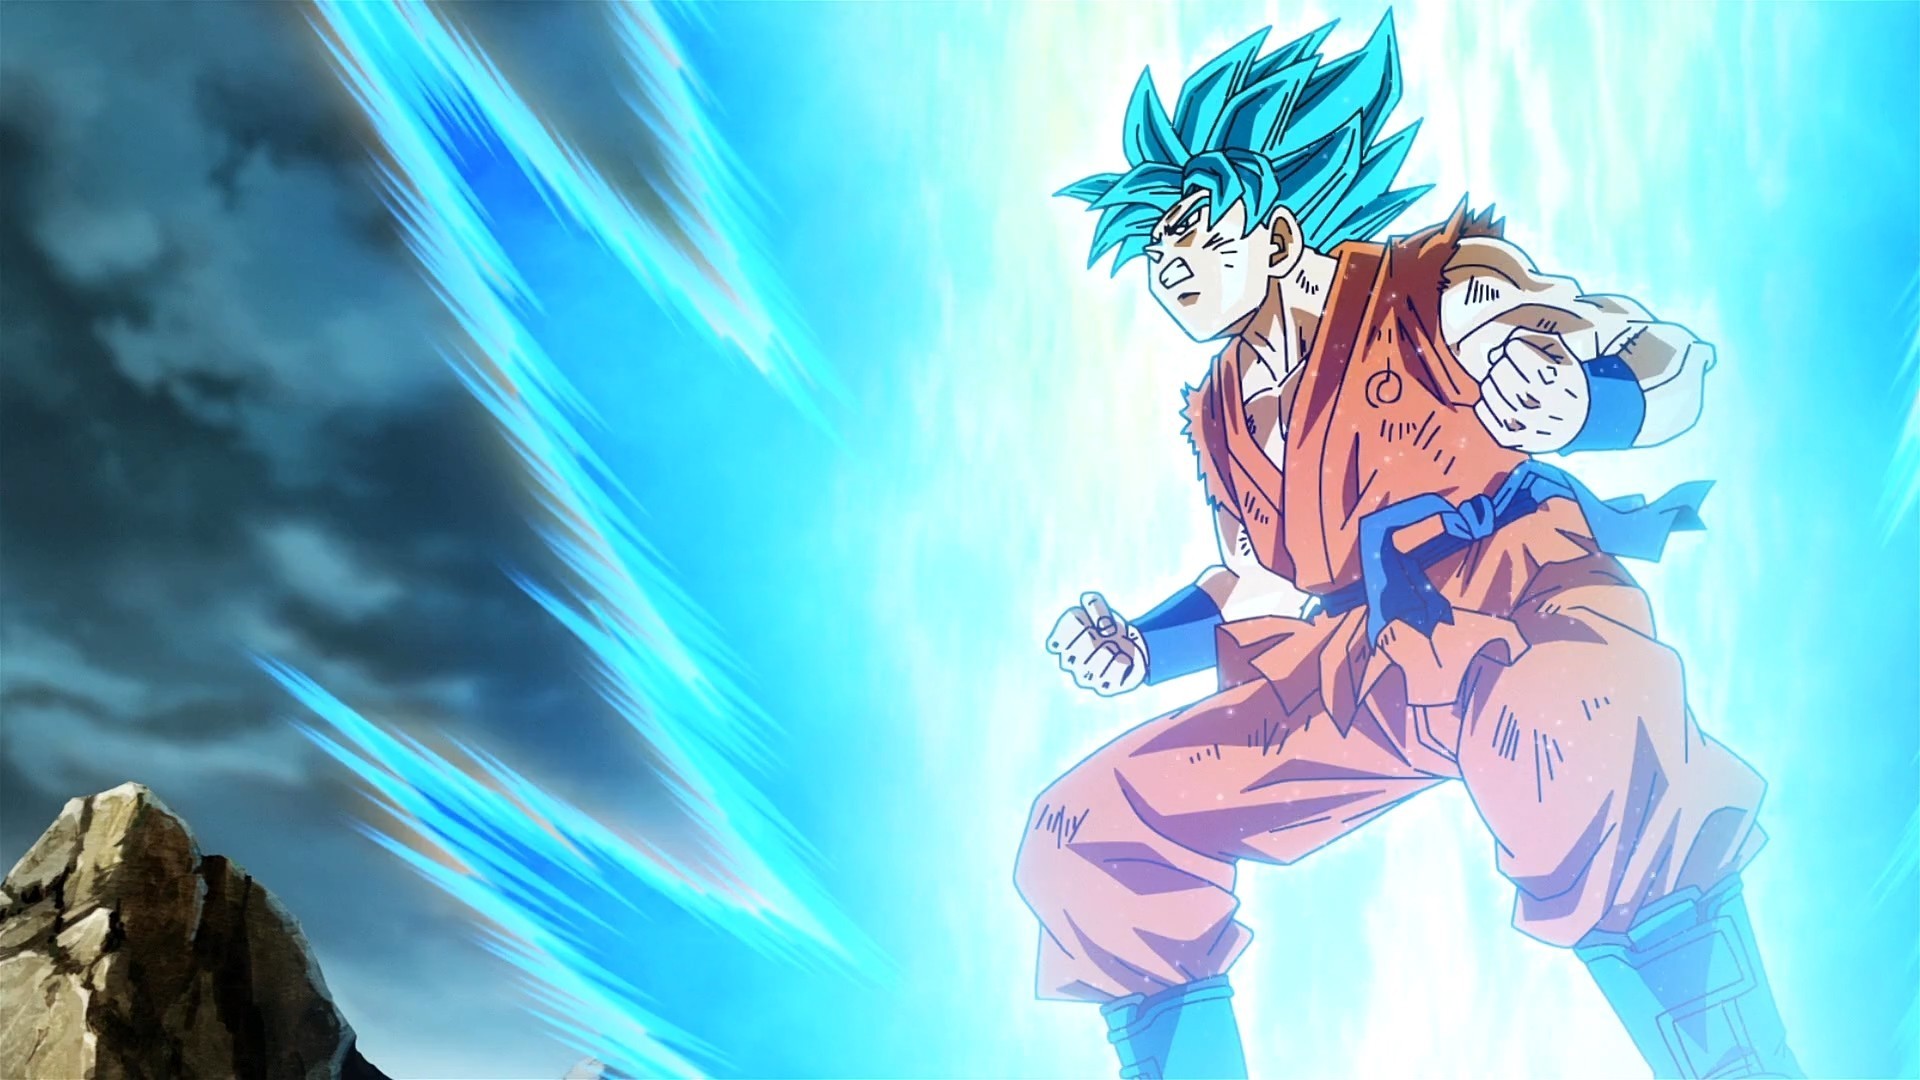 Goku SSJ Blue Desktop Backgrounds HD with resolution 1920X1080 pixel. You can use this wallpaper as background for your desktop Computer Screensavers, Android or iPhone smartphones